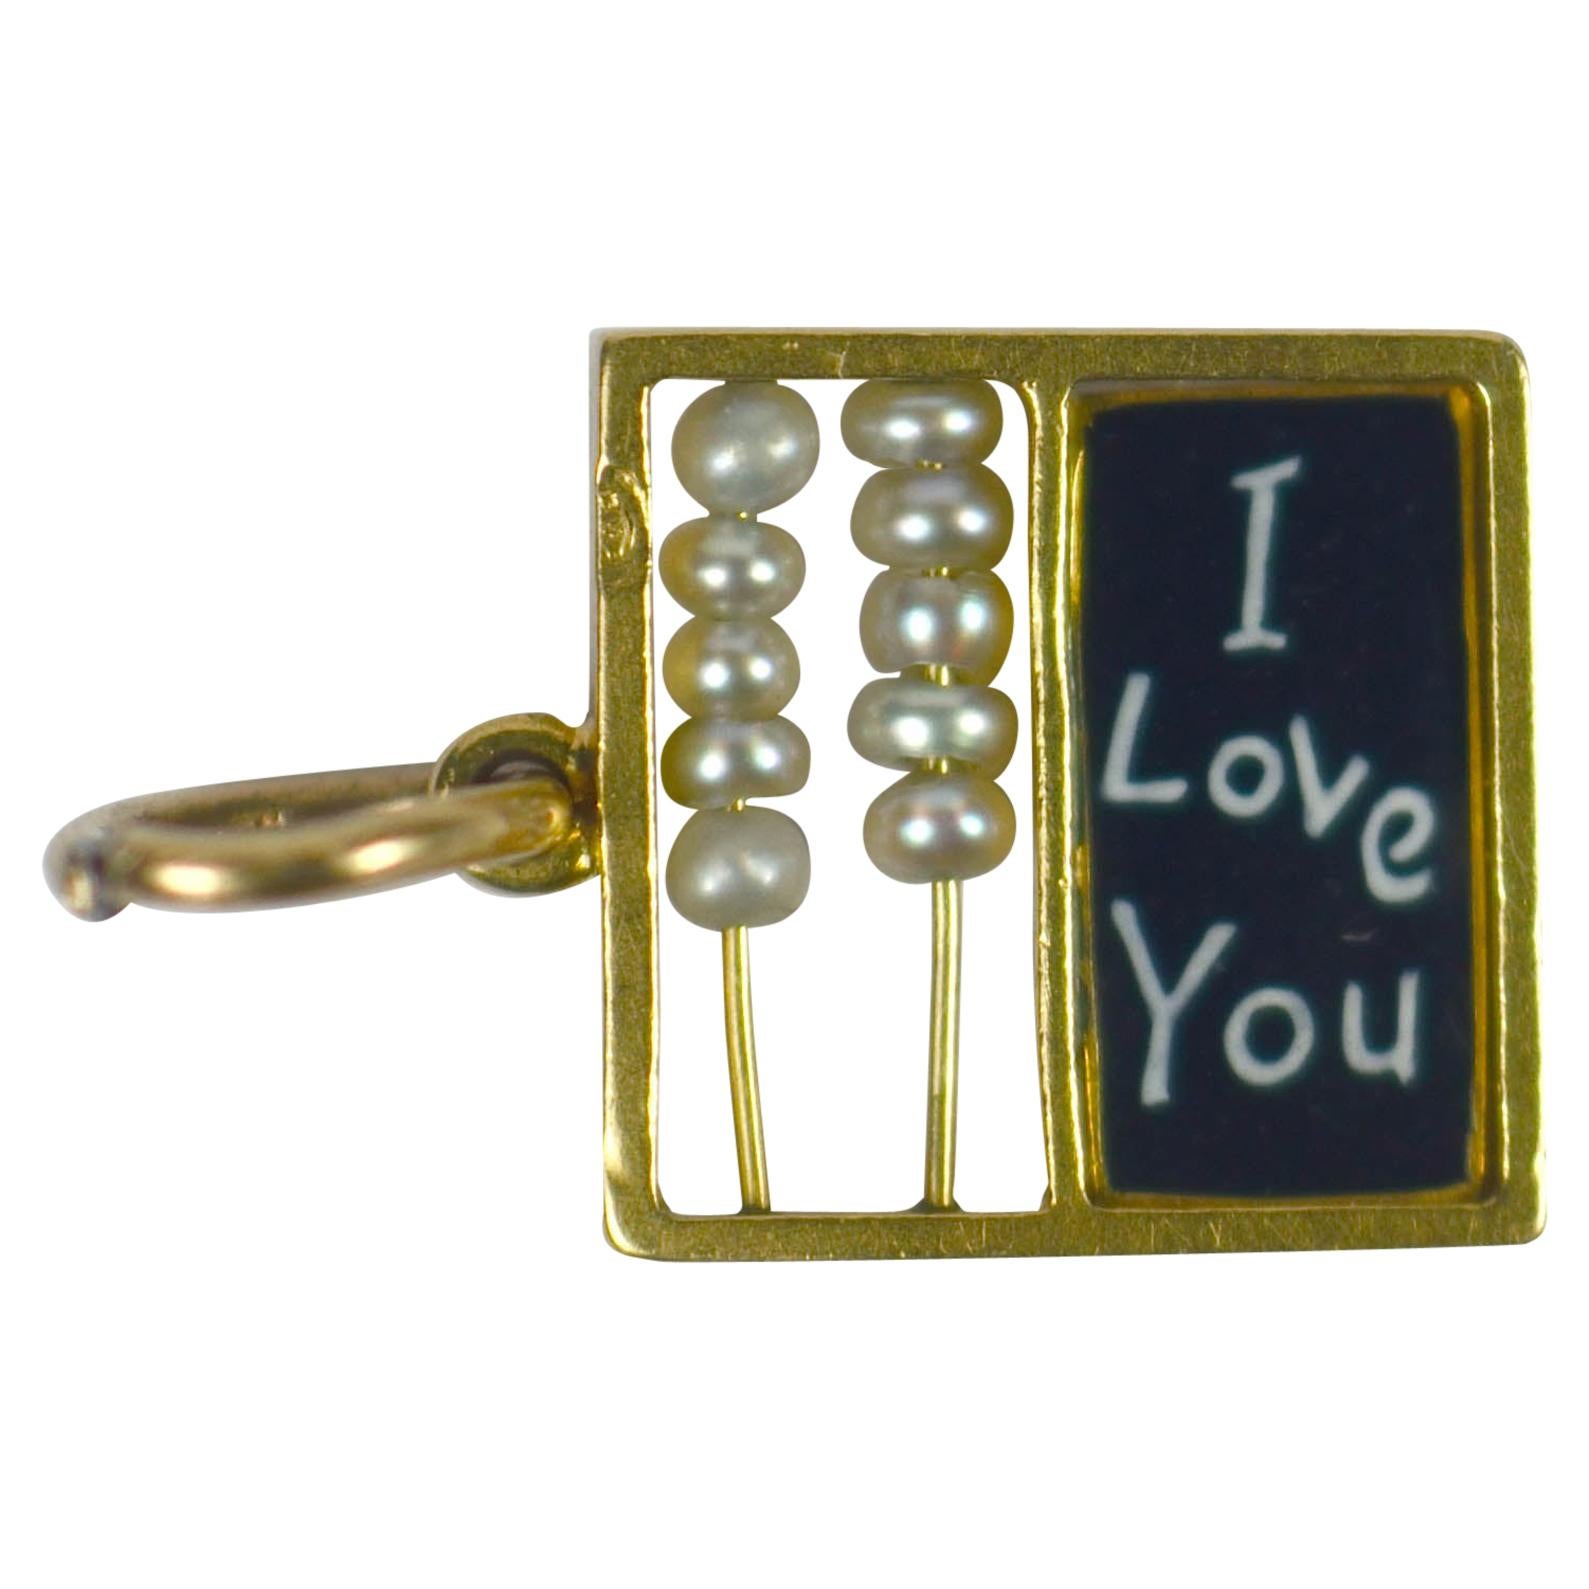 Let Me Count The Ways I Love You Gold Enamel Pearl Charm